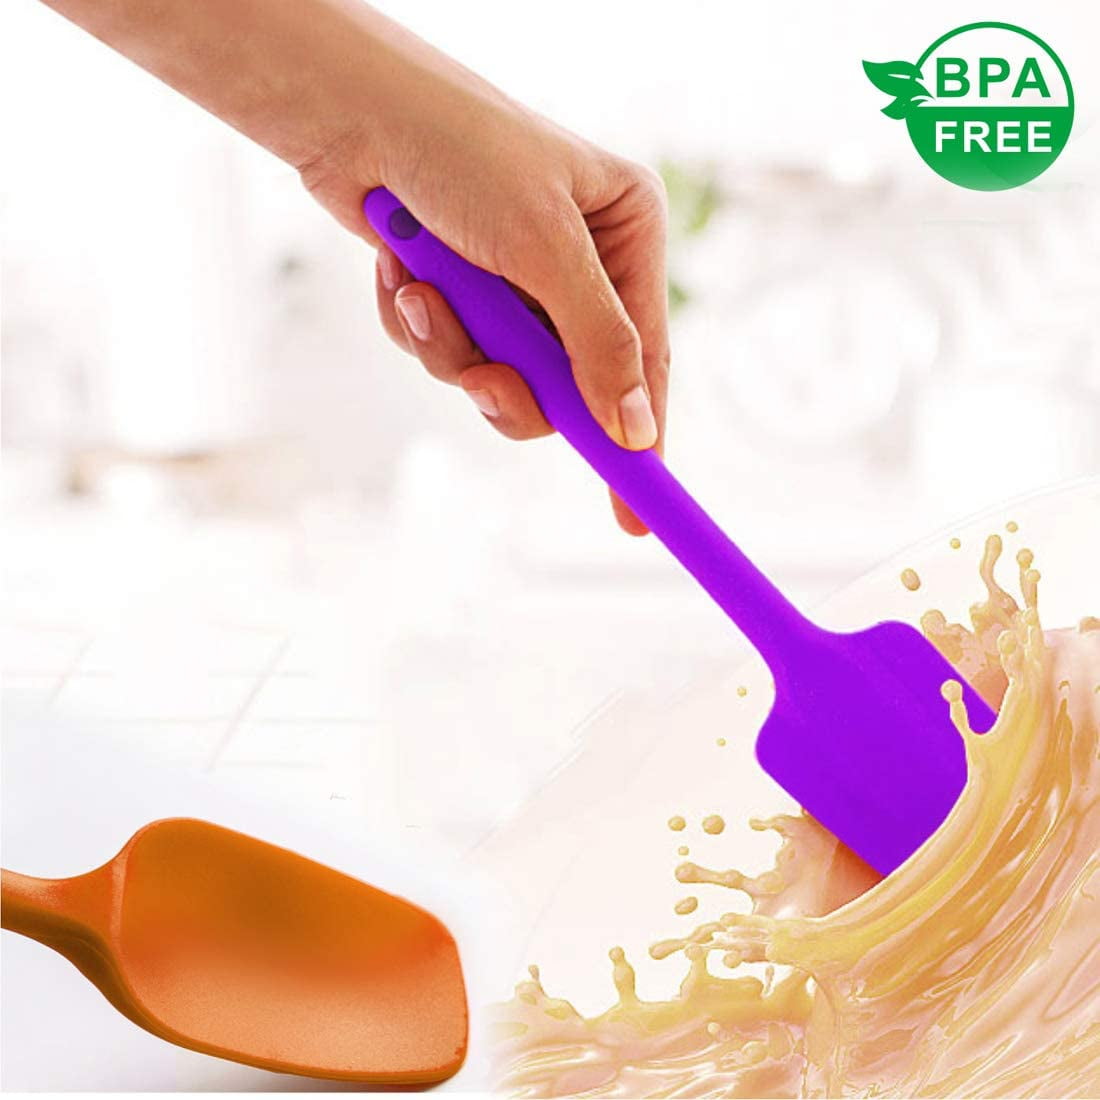 oannao Silicone Cooking Utensils Set - 446°F Heat Resistant Silicone Kitchen  Ute